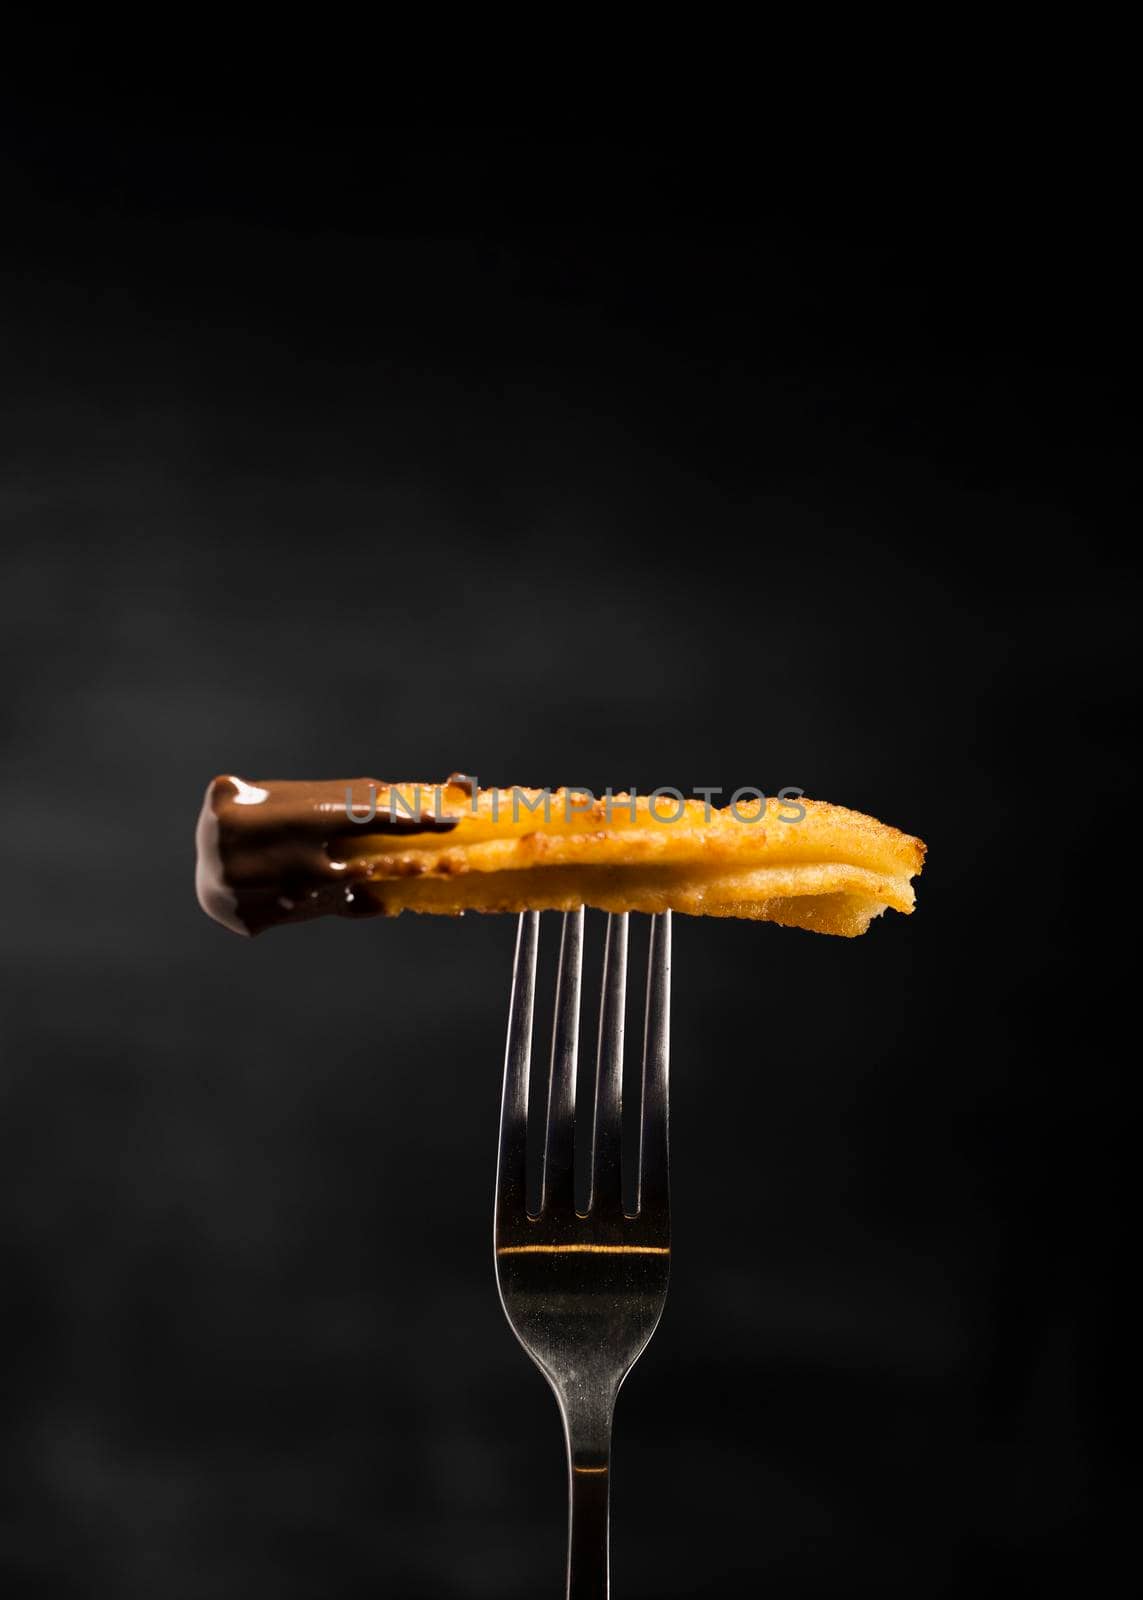 minimalist fried churros fork front view. High resolution photo